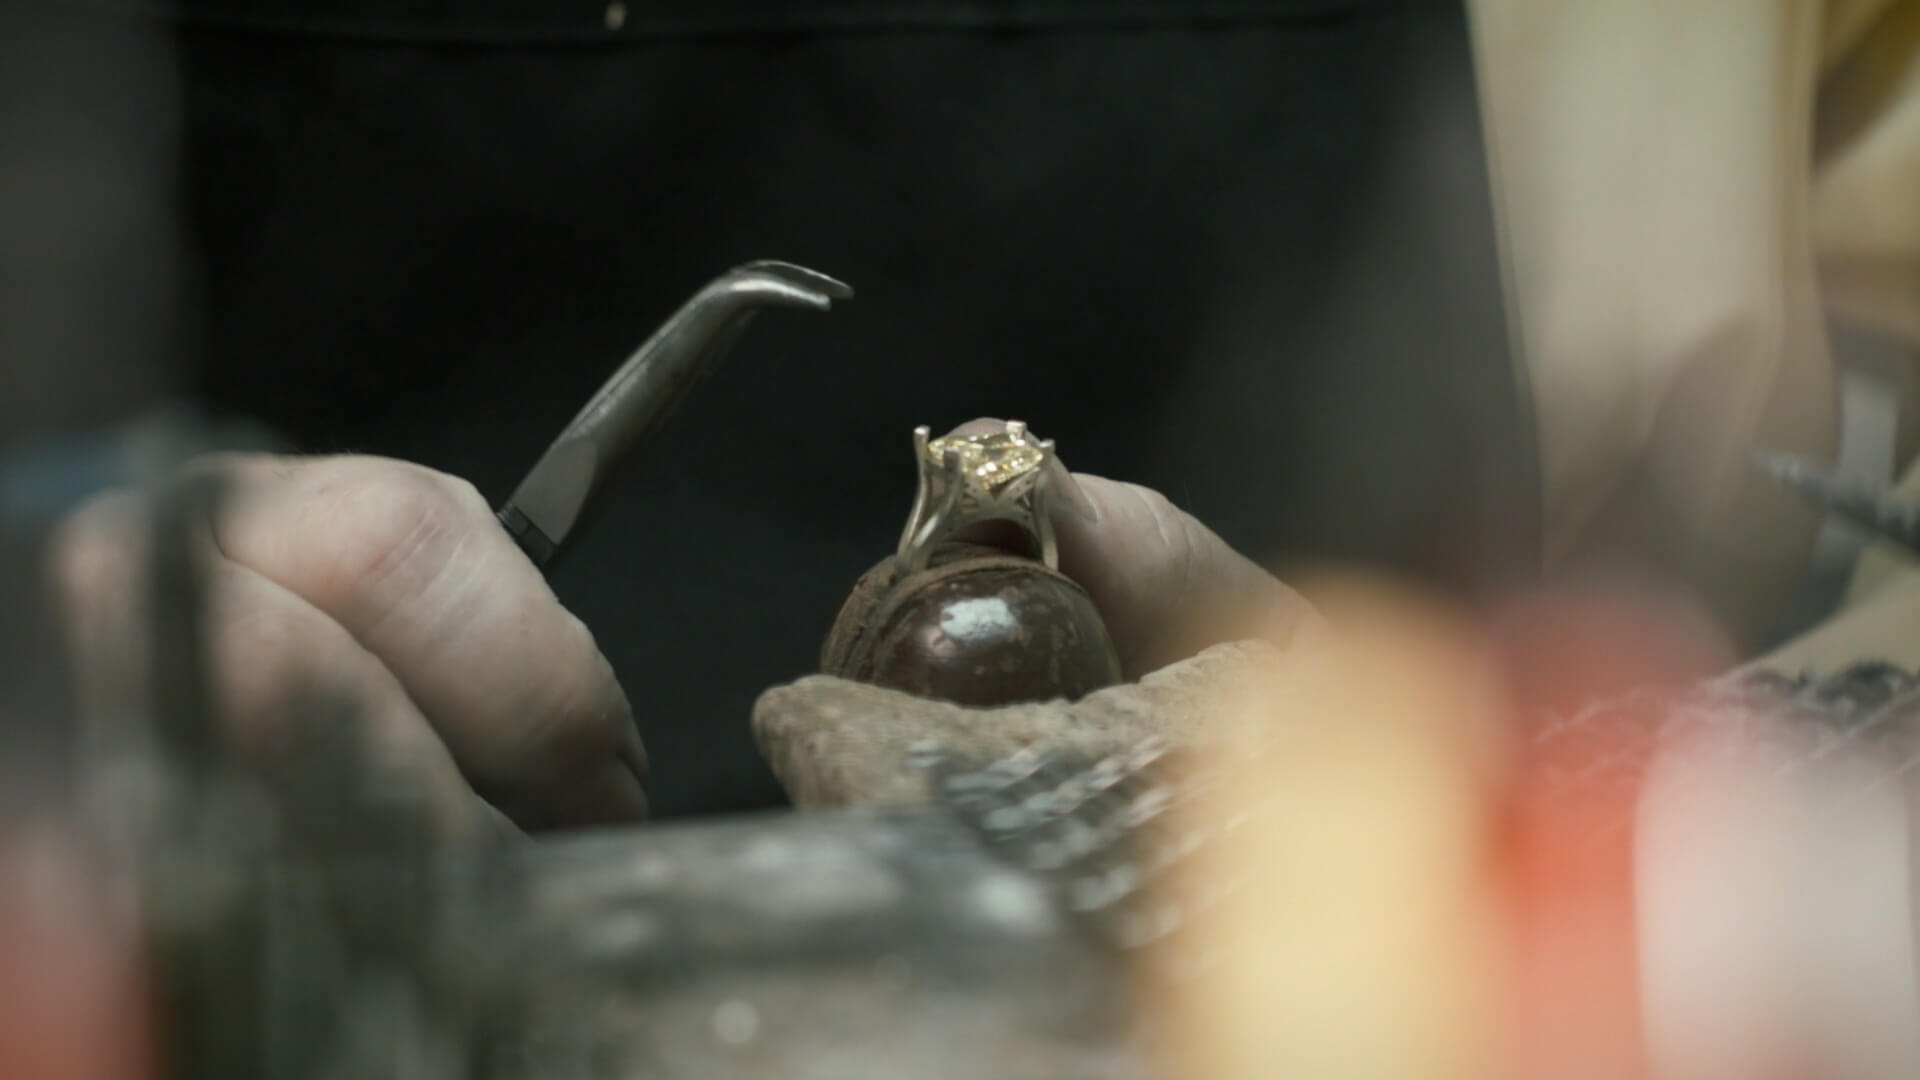 A close-up of a jewelry hand tightening a prong on a ring. The prong is loose and needs to be tightened to secure the stone in the ring.